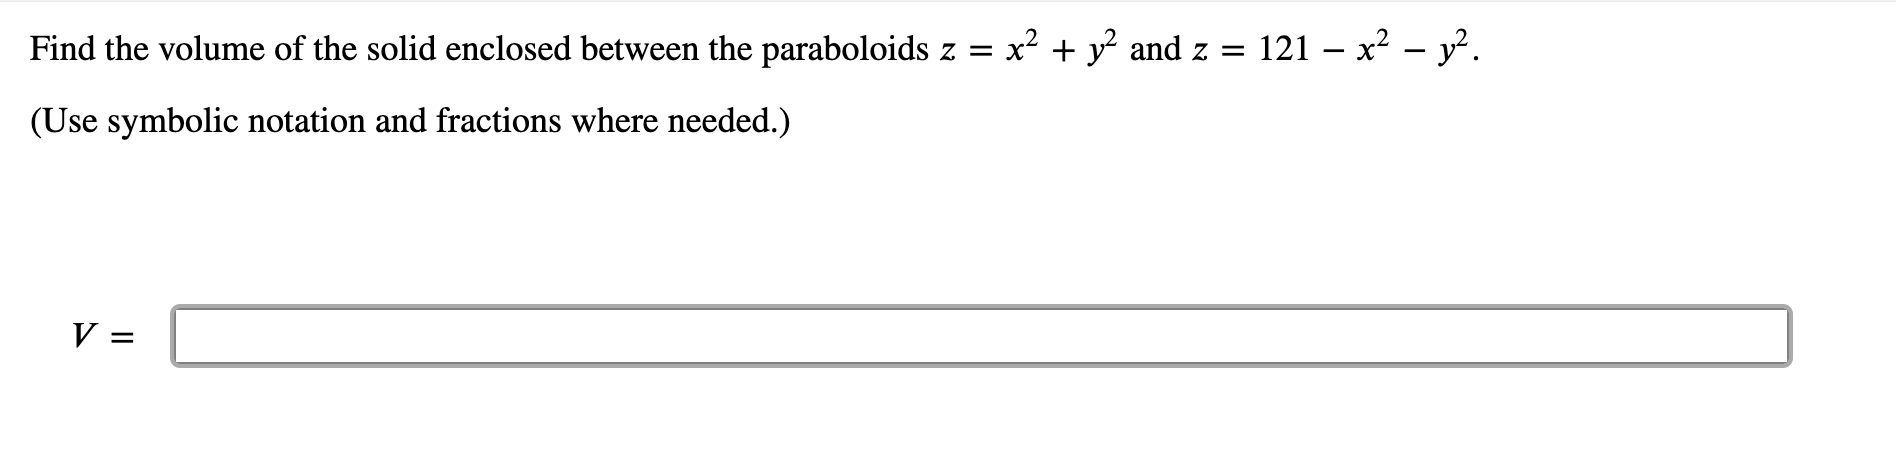 Find the volume of the solid enclosed between the paraboloids \( z=x^{2}+y^{2} \) and \( z=121-x^{2}-y^{2} \). (Use symbolic 